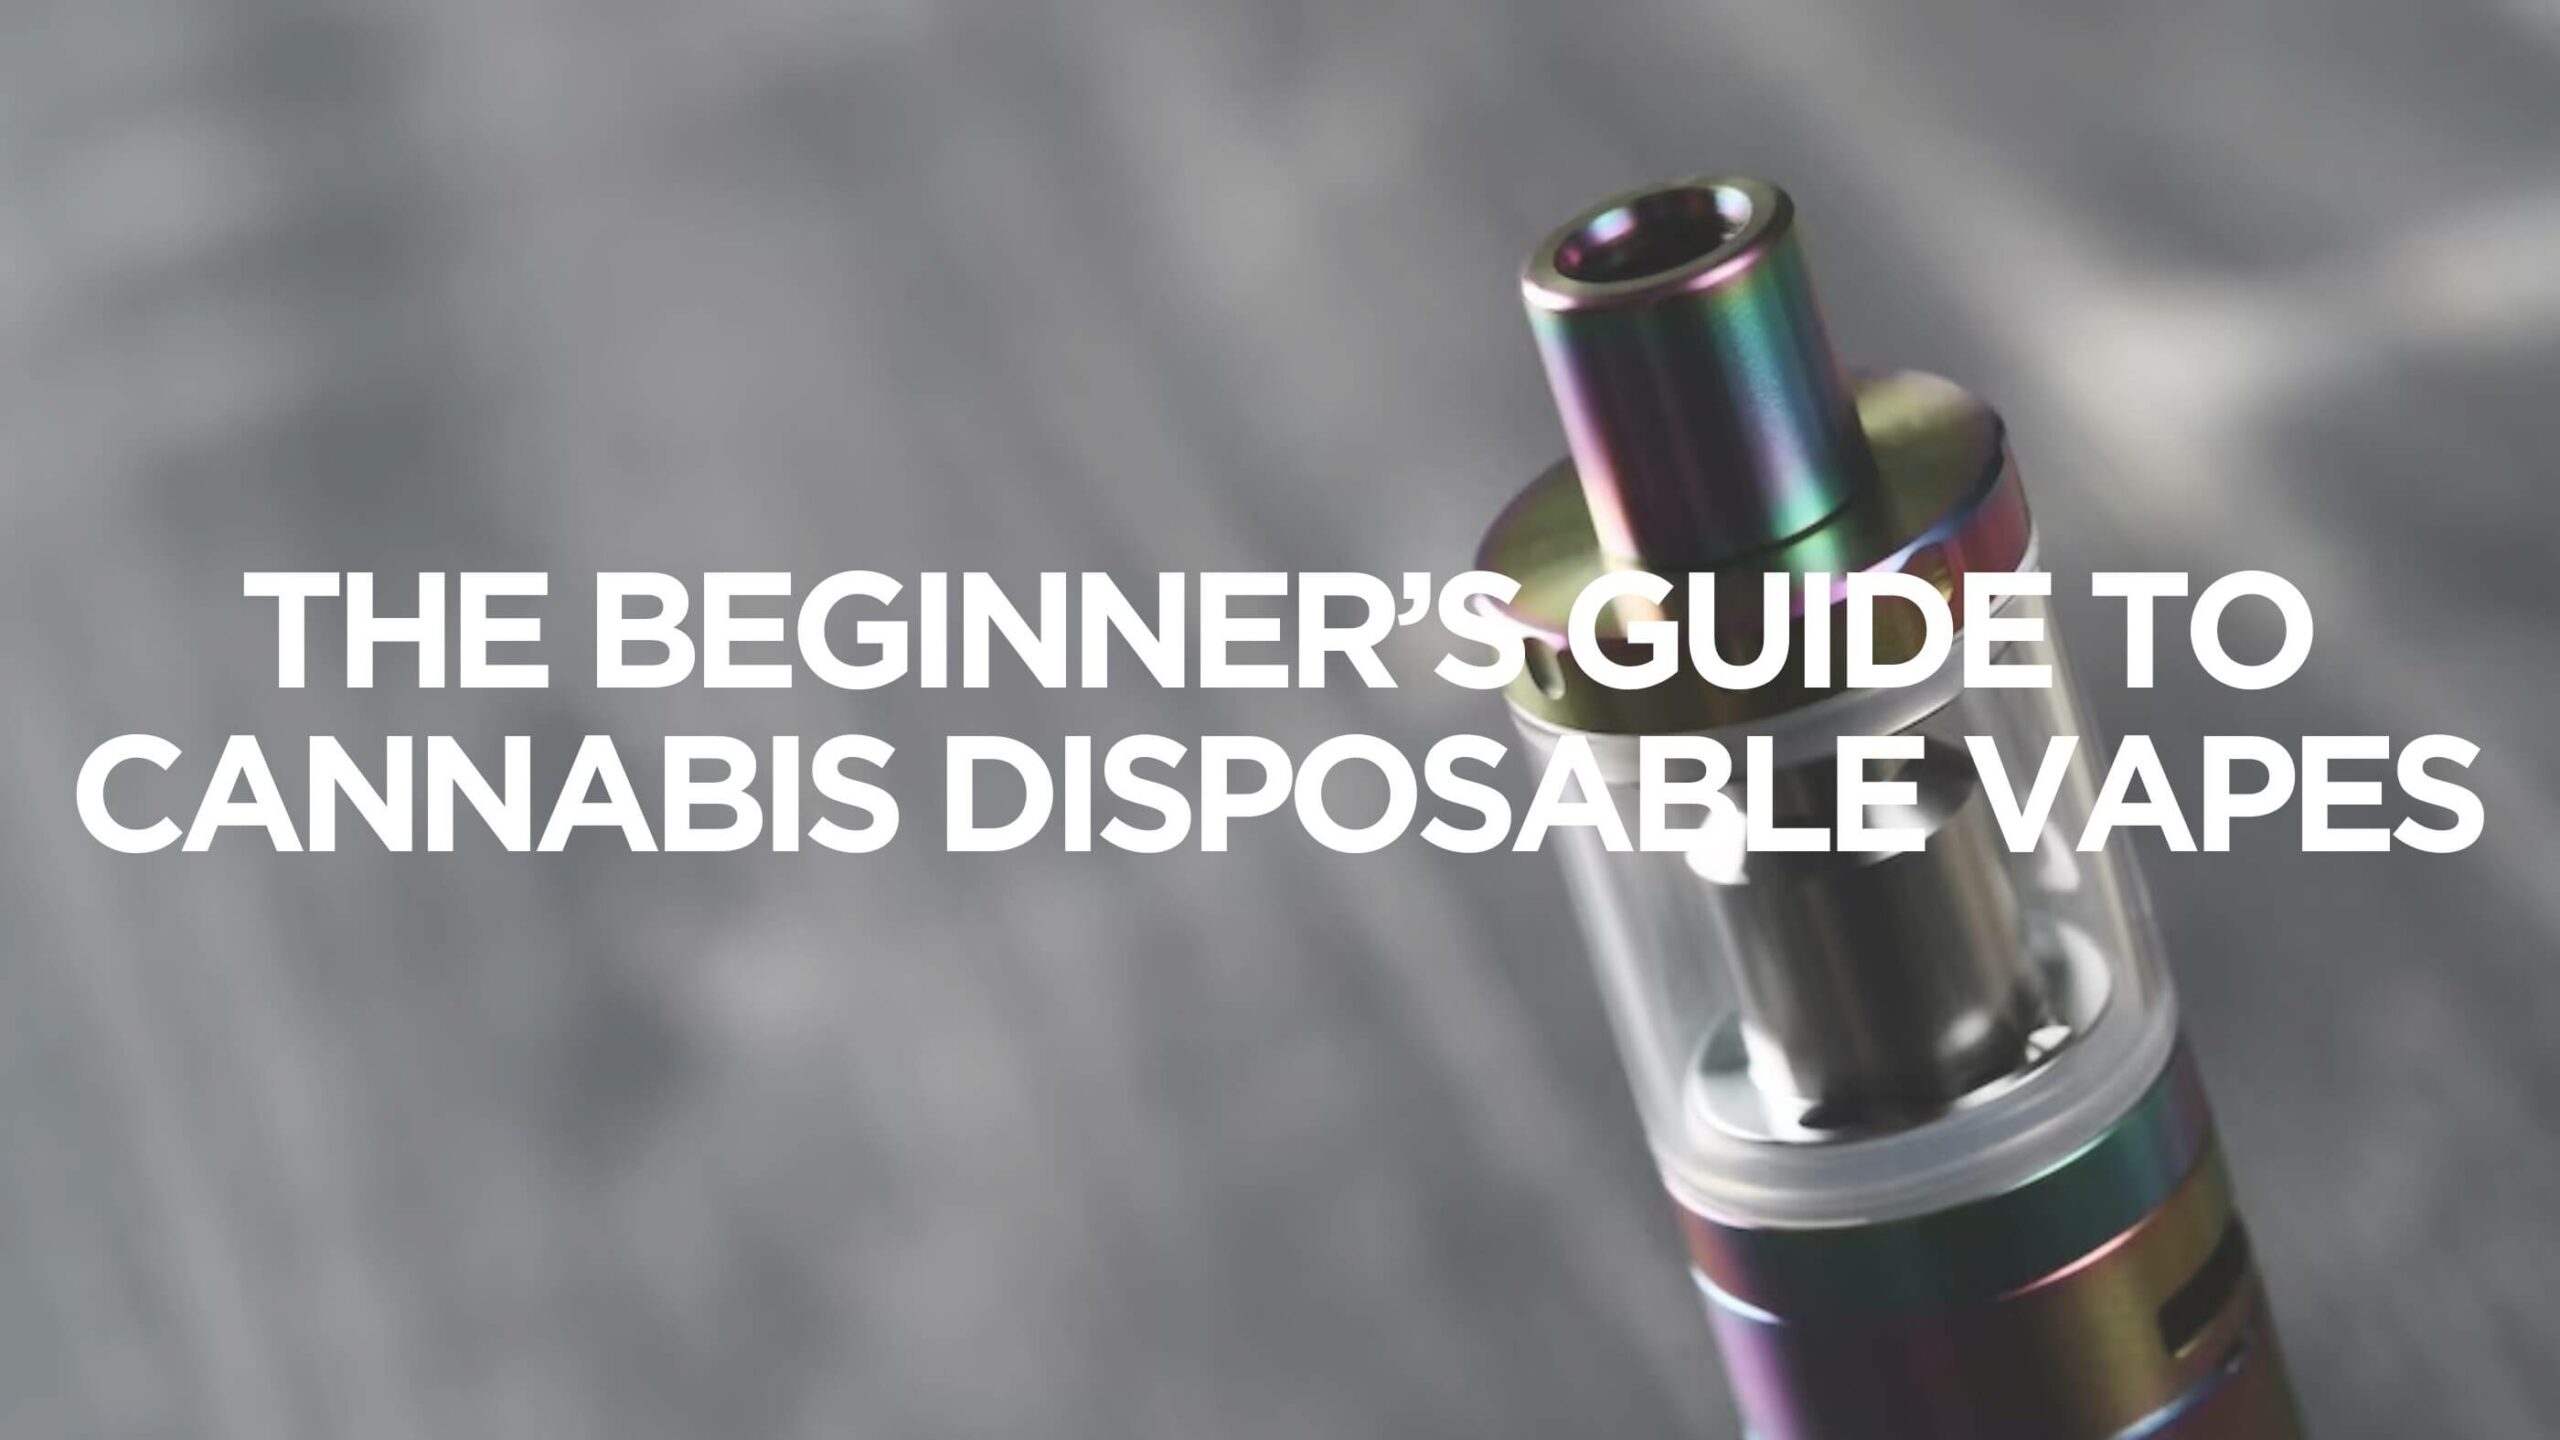 The Beginners Guide To Cannabis Disposable Vapes